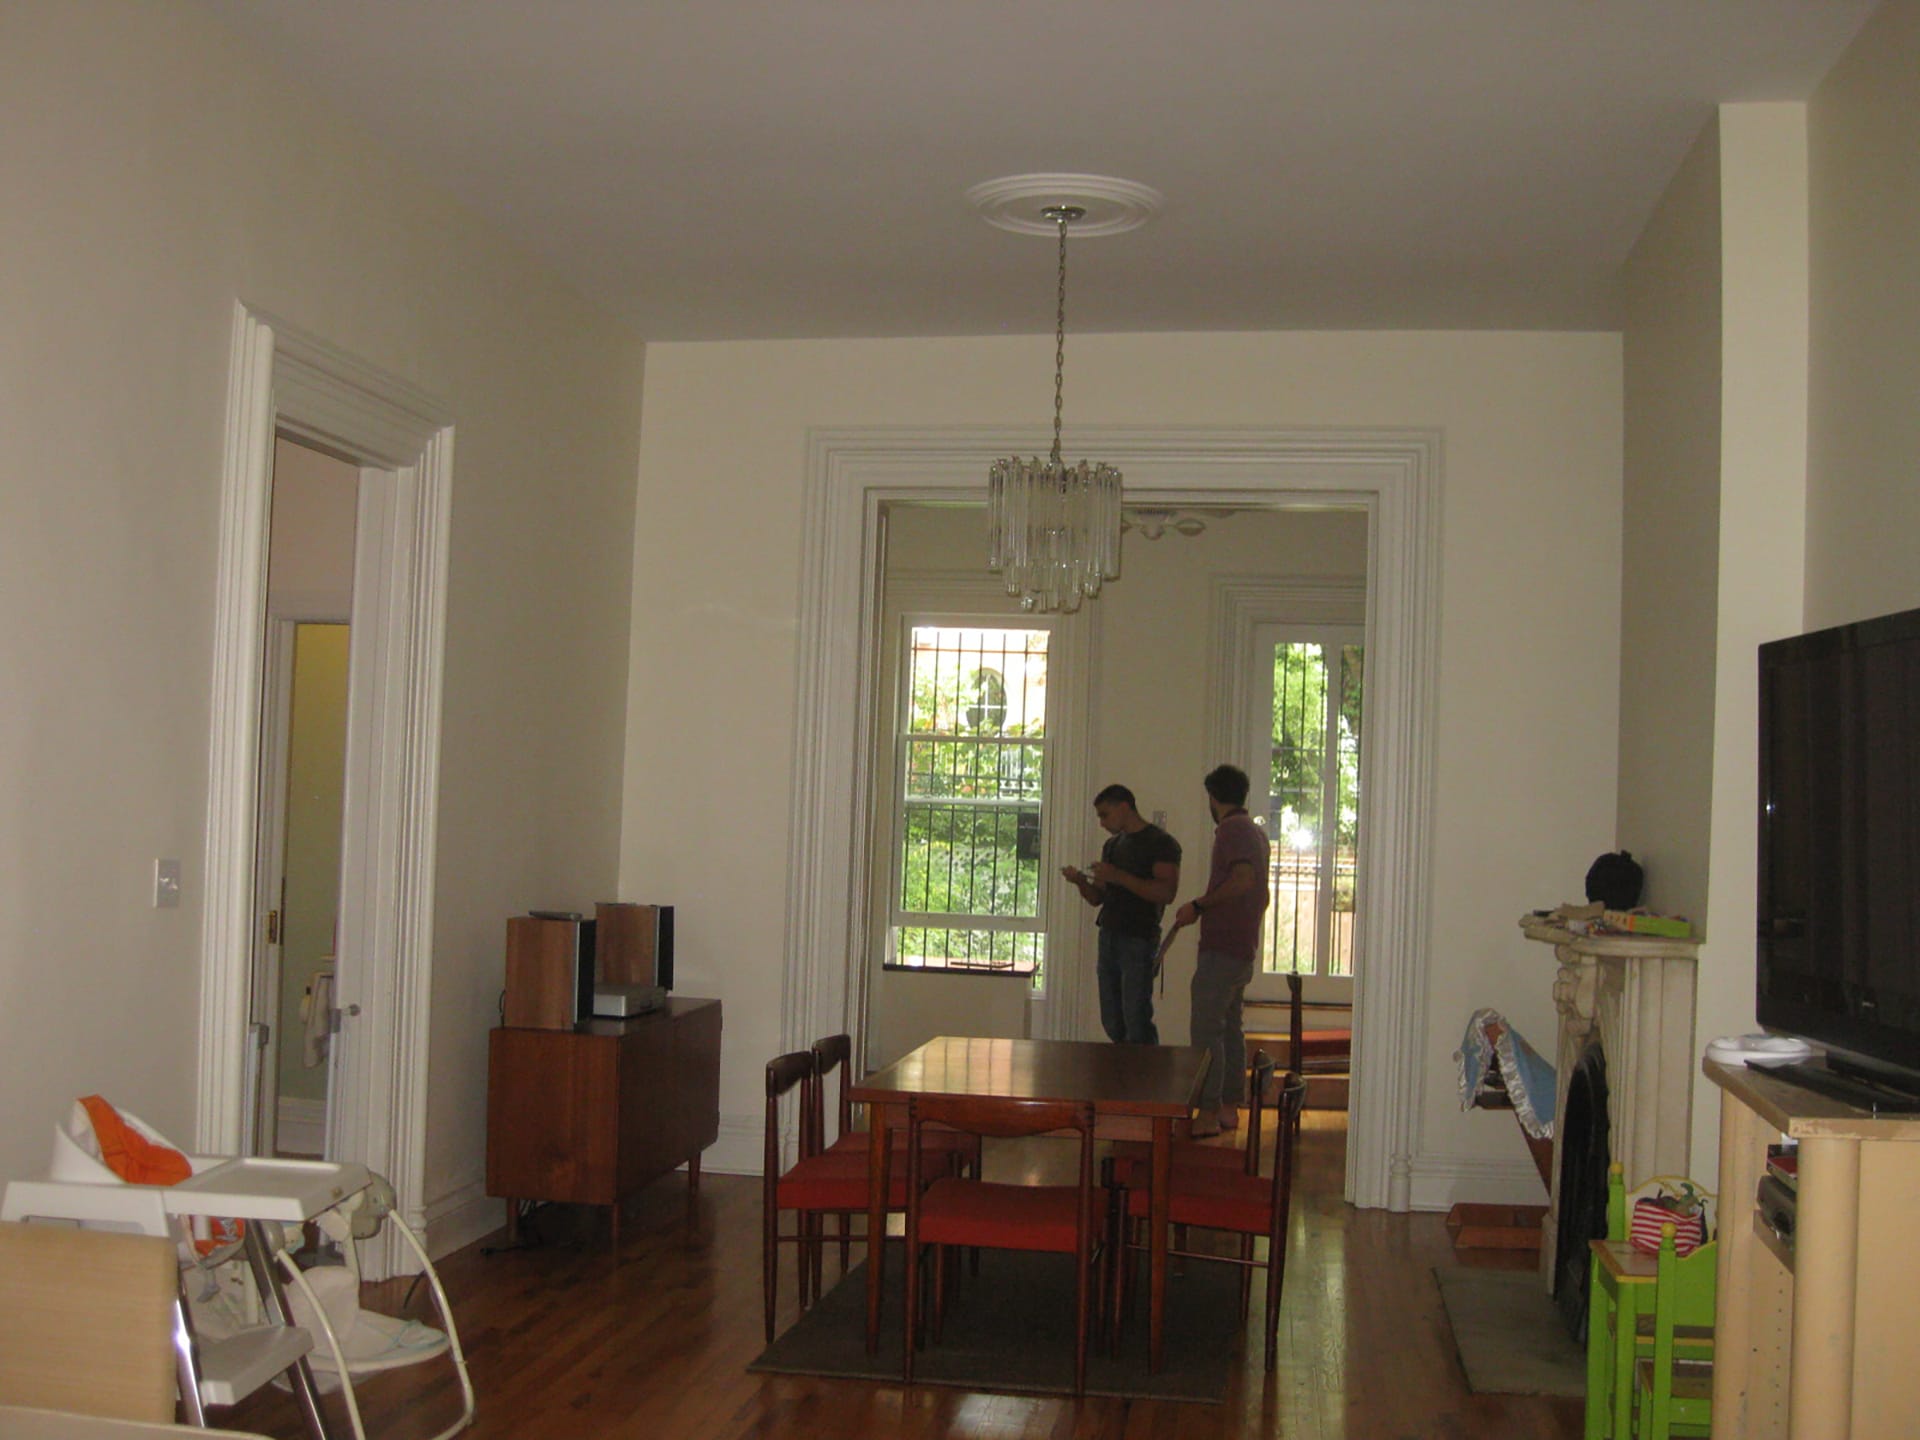 Dining room in a Fort Greene townhouse before our renovation